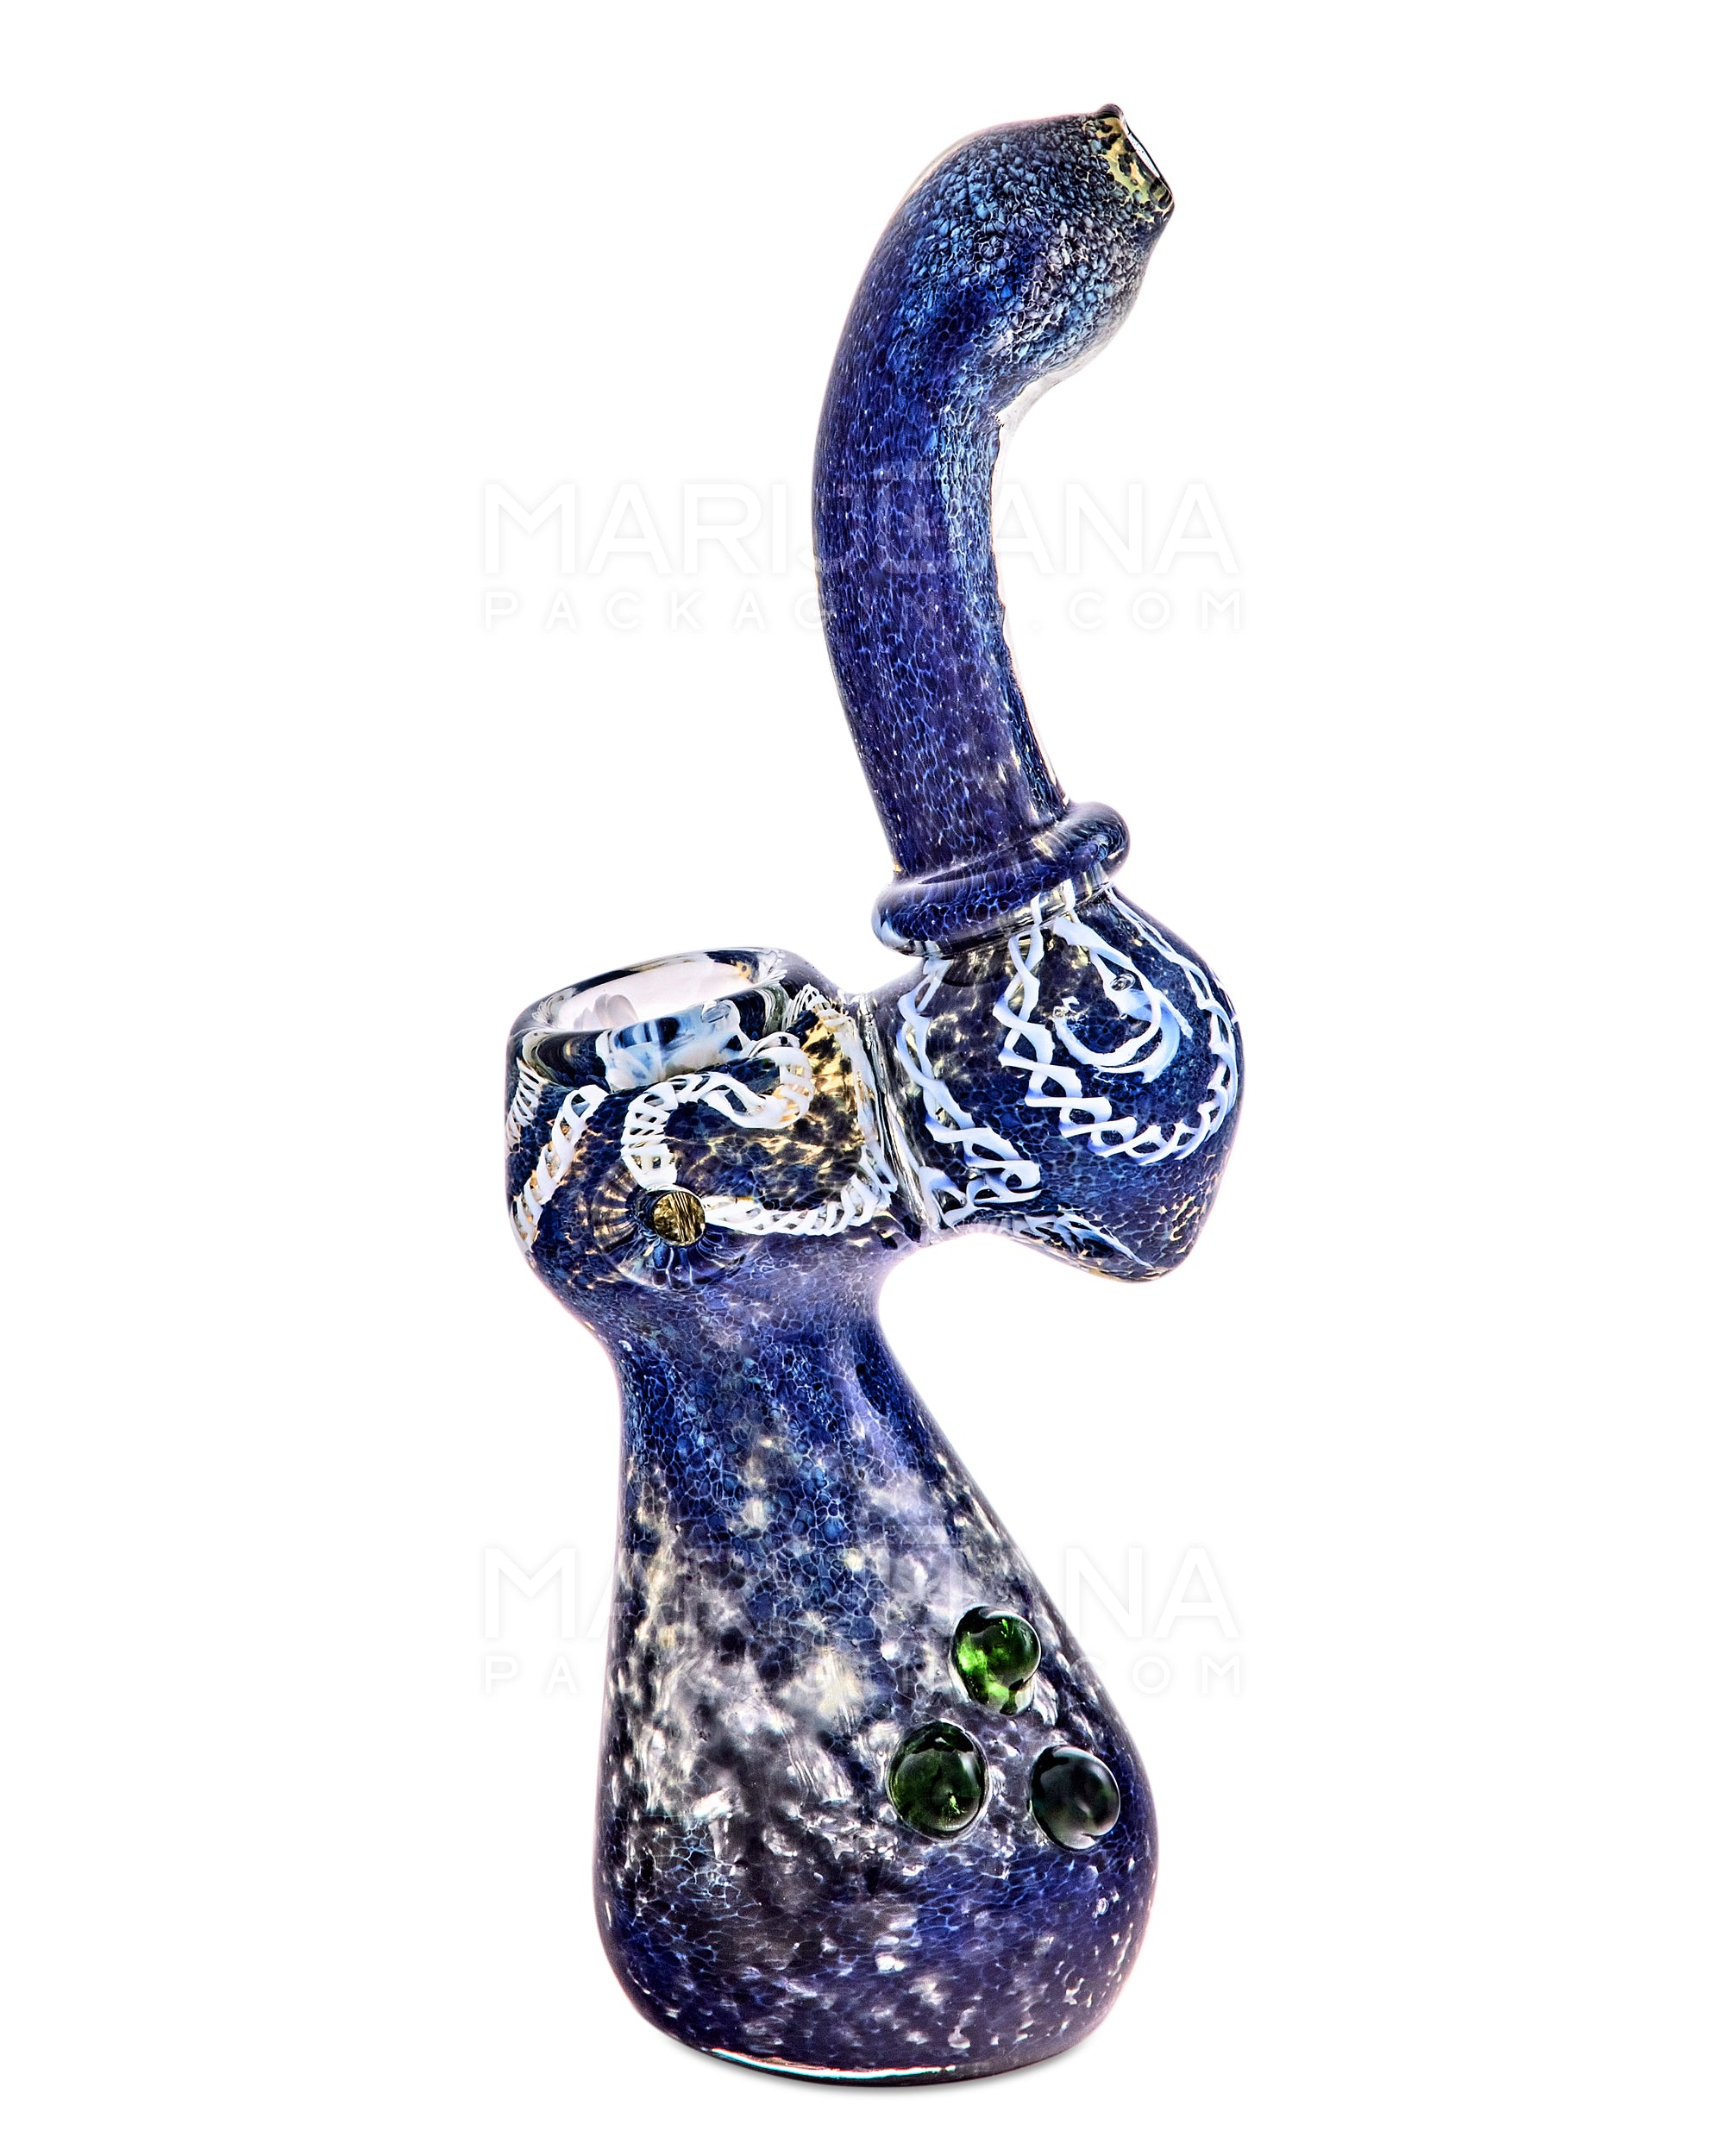 Frit & Gold Fumed Ringed Bubbler w/ Ribboning & Triple Knockers | 8in Tall - Glass - Blue - 10